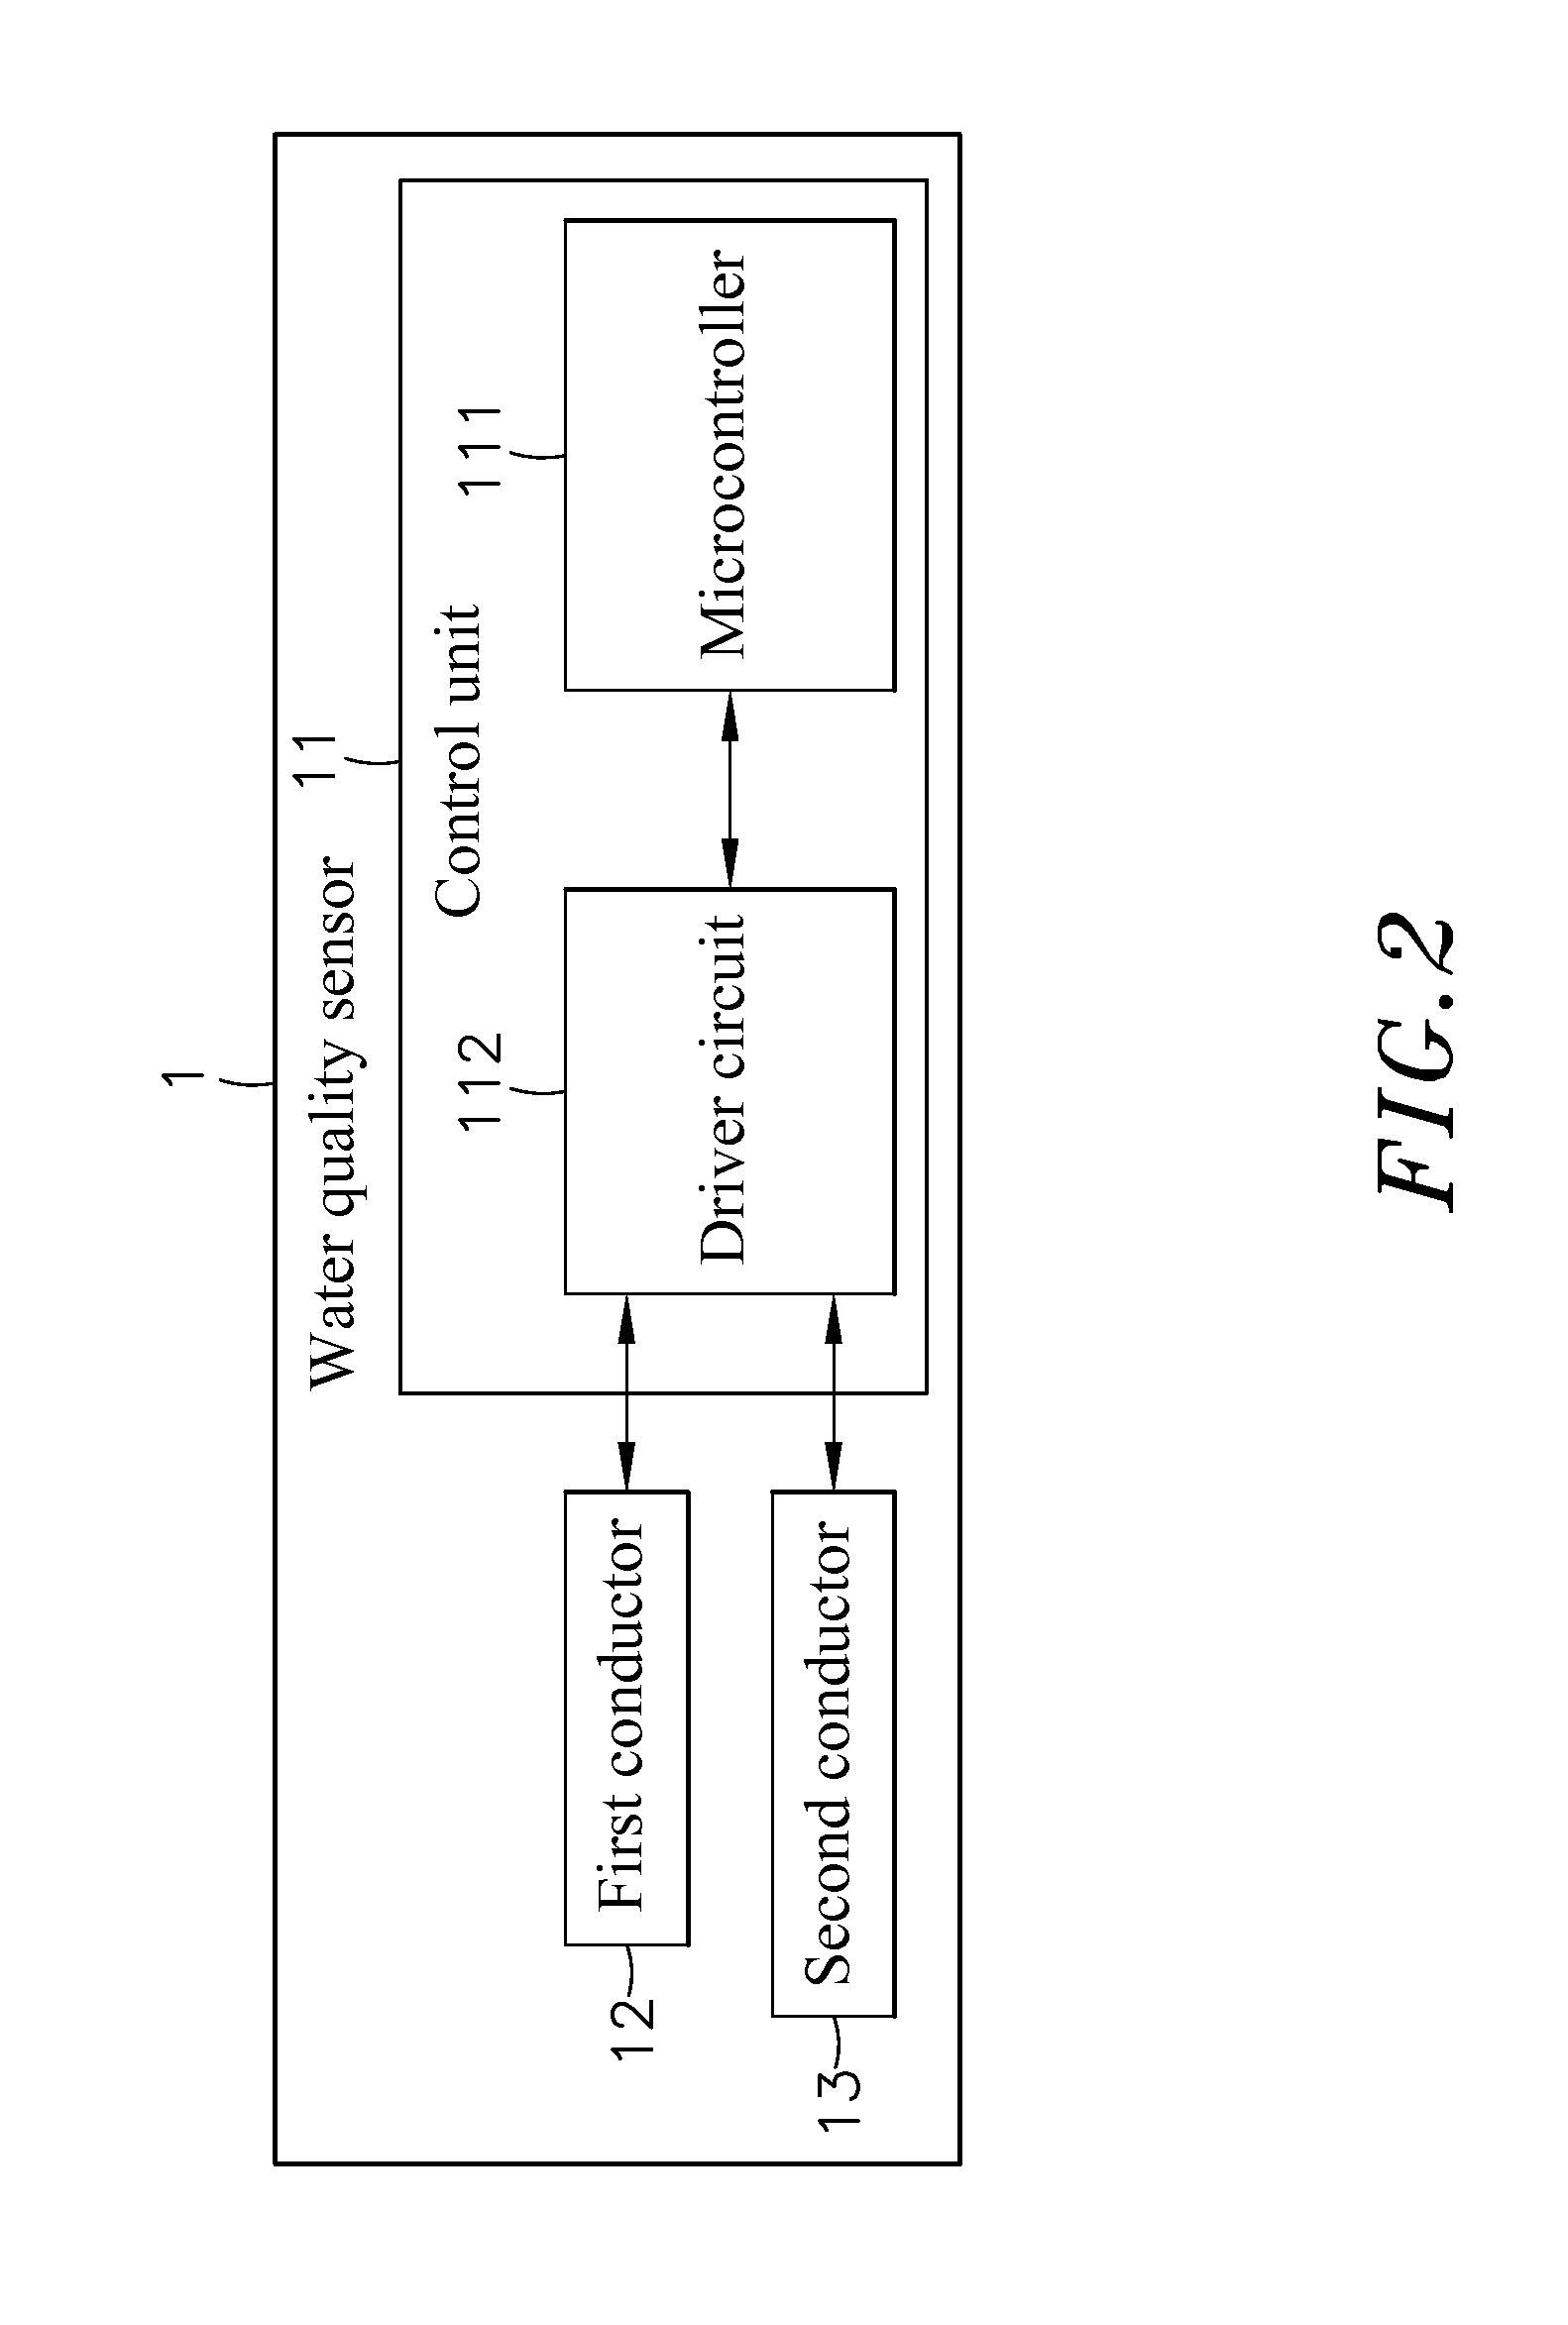 Conductivity measurement method that slows down conductor oxidation